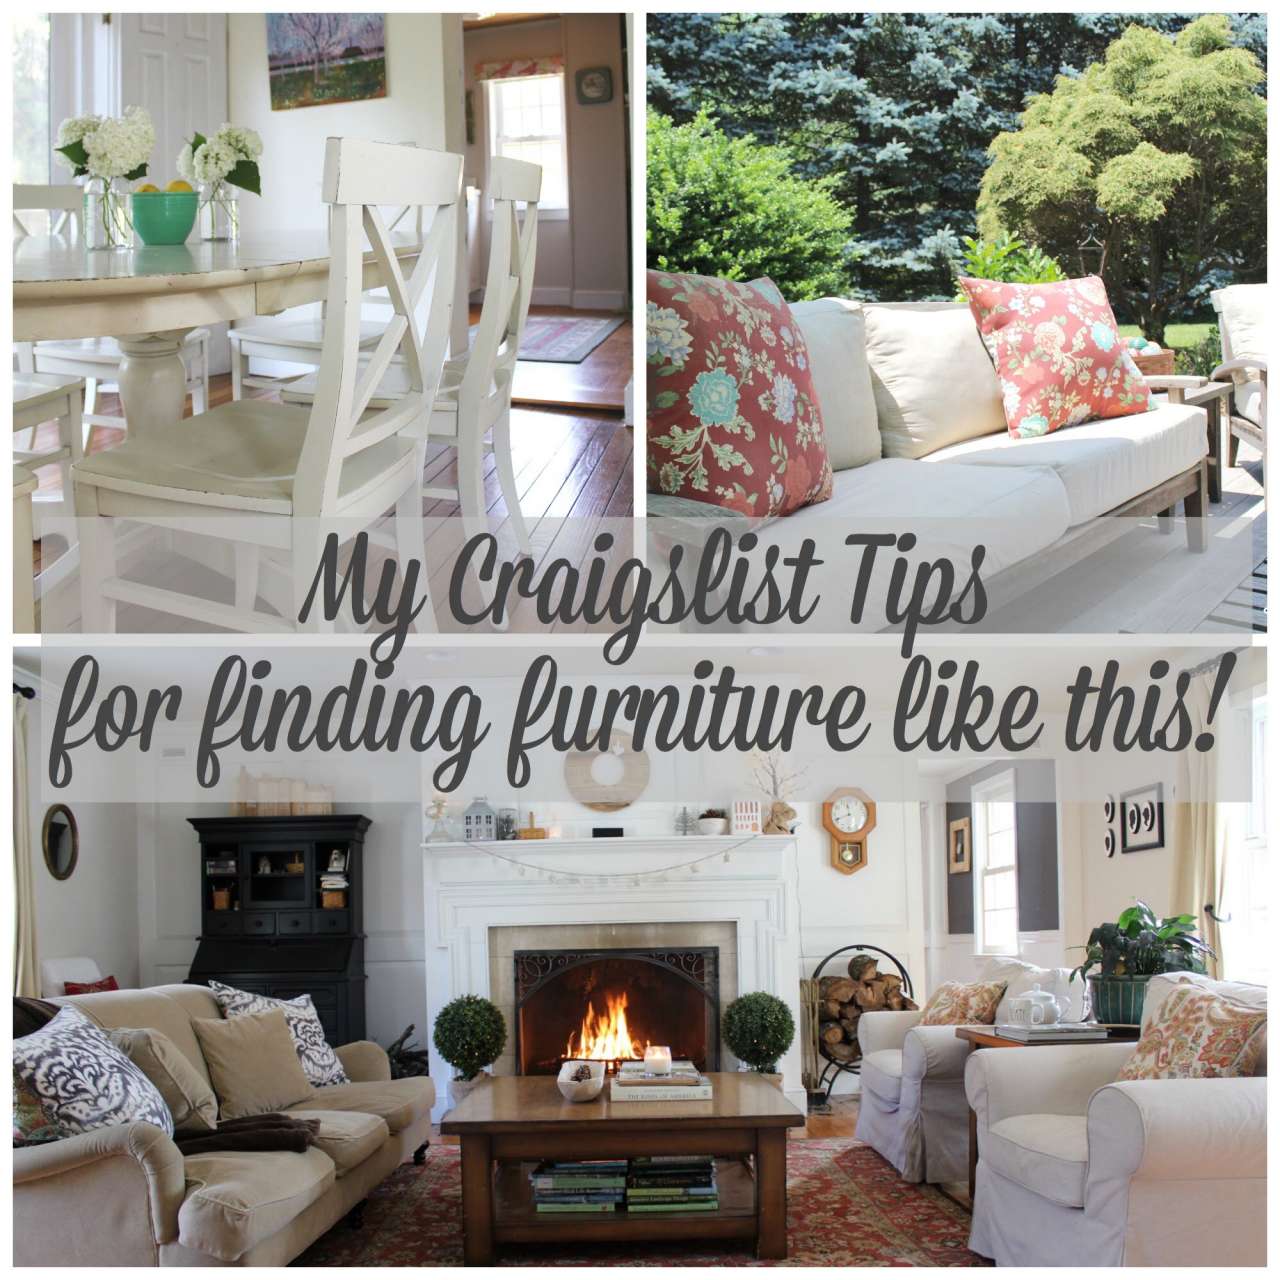 Believe it or not I found all this furniture on Craigslist! Stop by to see my tips for scoring this best furniture finds. #craigslist http://lehmanlane.net